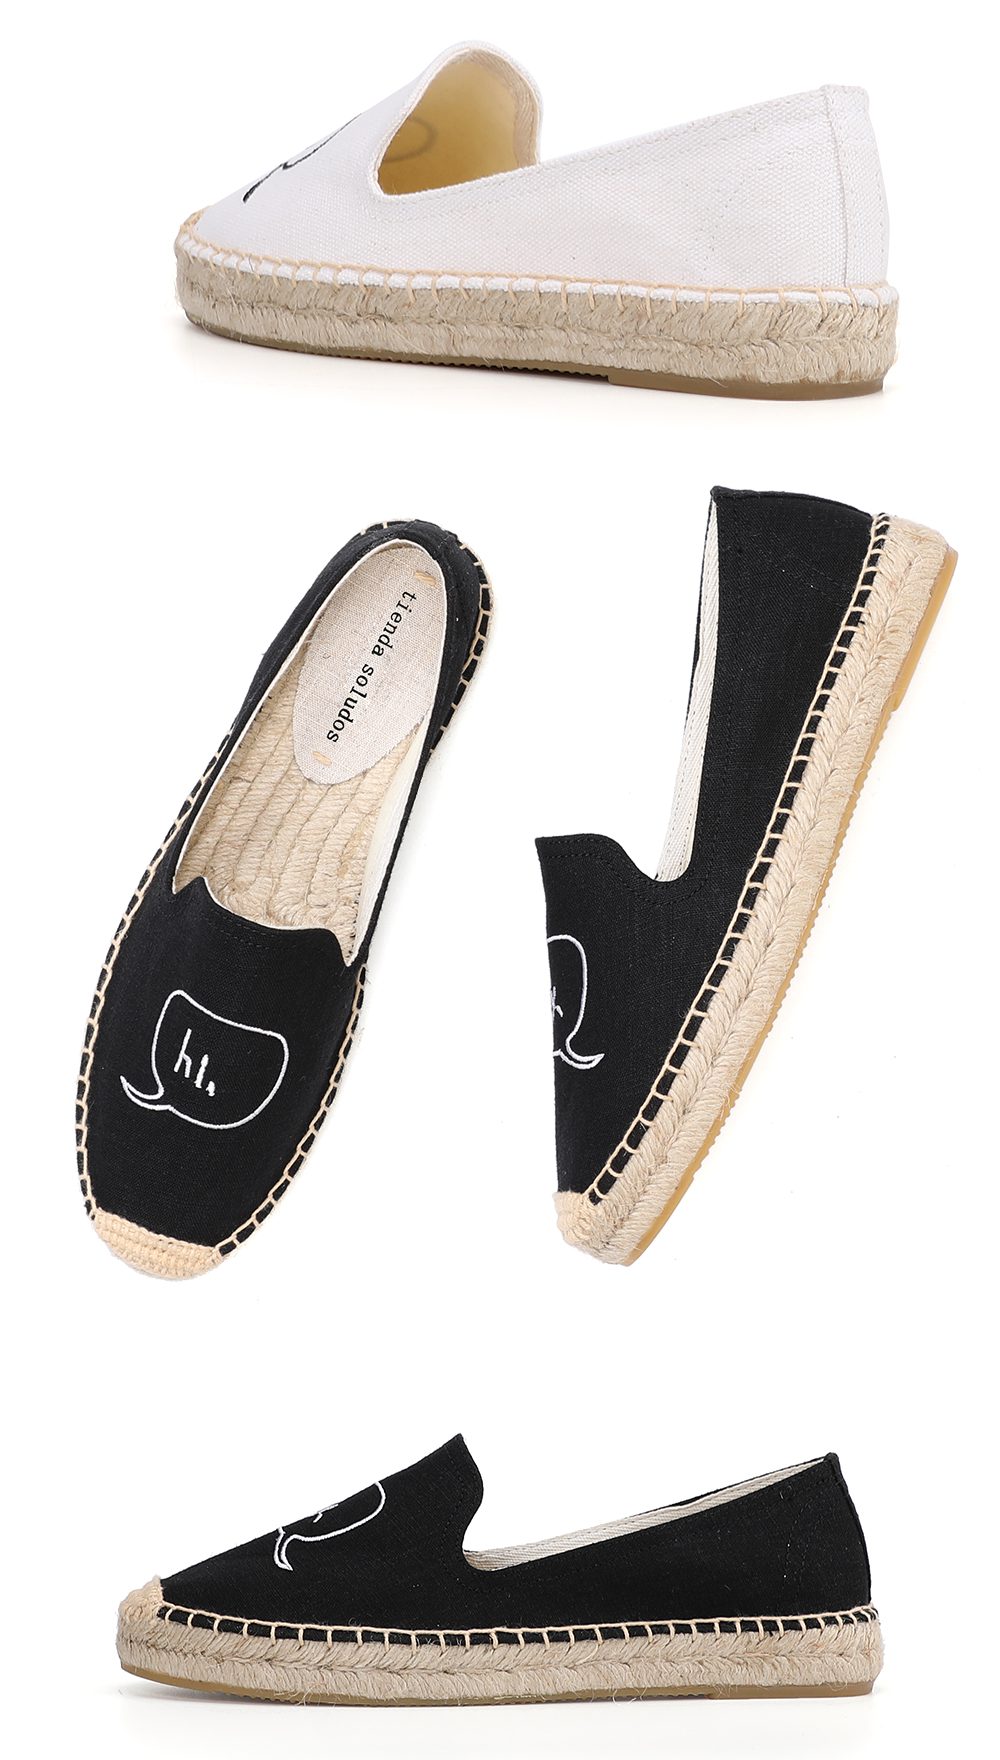 2021 Real Espadrilles Flats Shoes Zapatillas Mujer Casual Sapatos Slip On Ladies Thick Bottom Woman Hemp Loafer Fishermen Straw